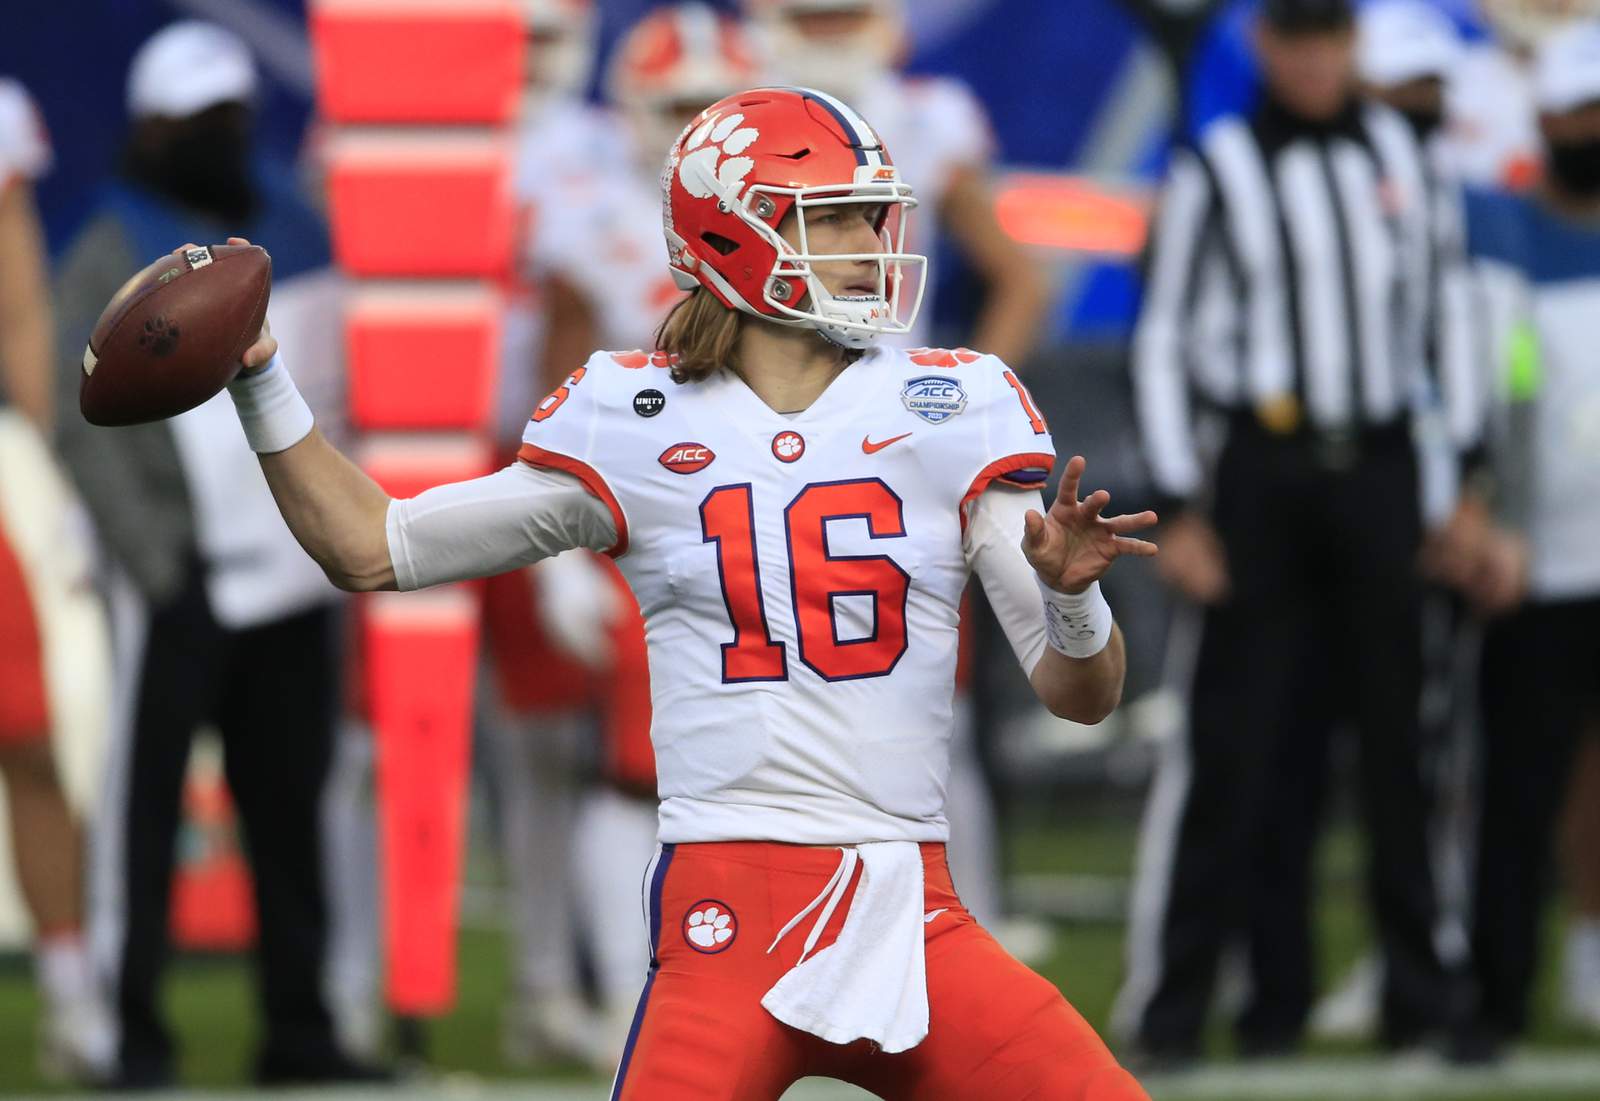 Sugar Bowl features Clemson-Ohio State CFP semifinal rematch